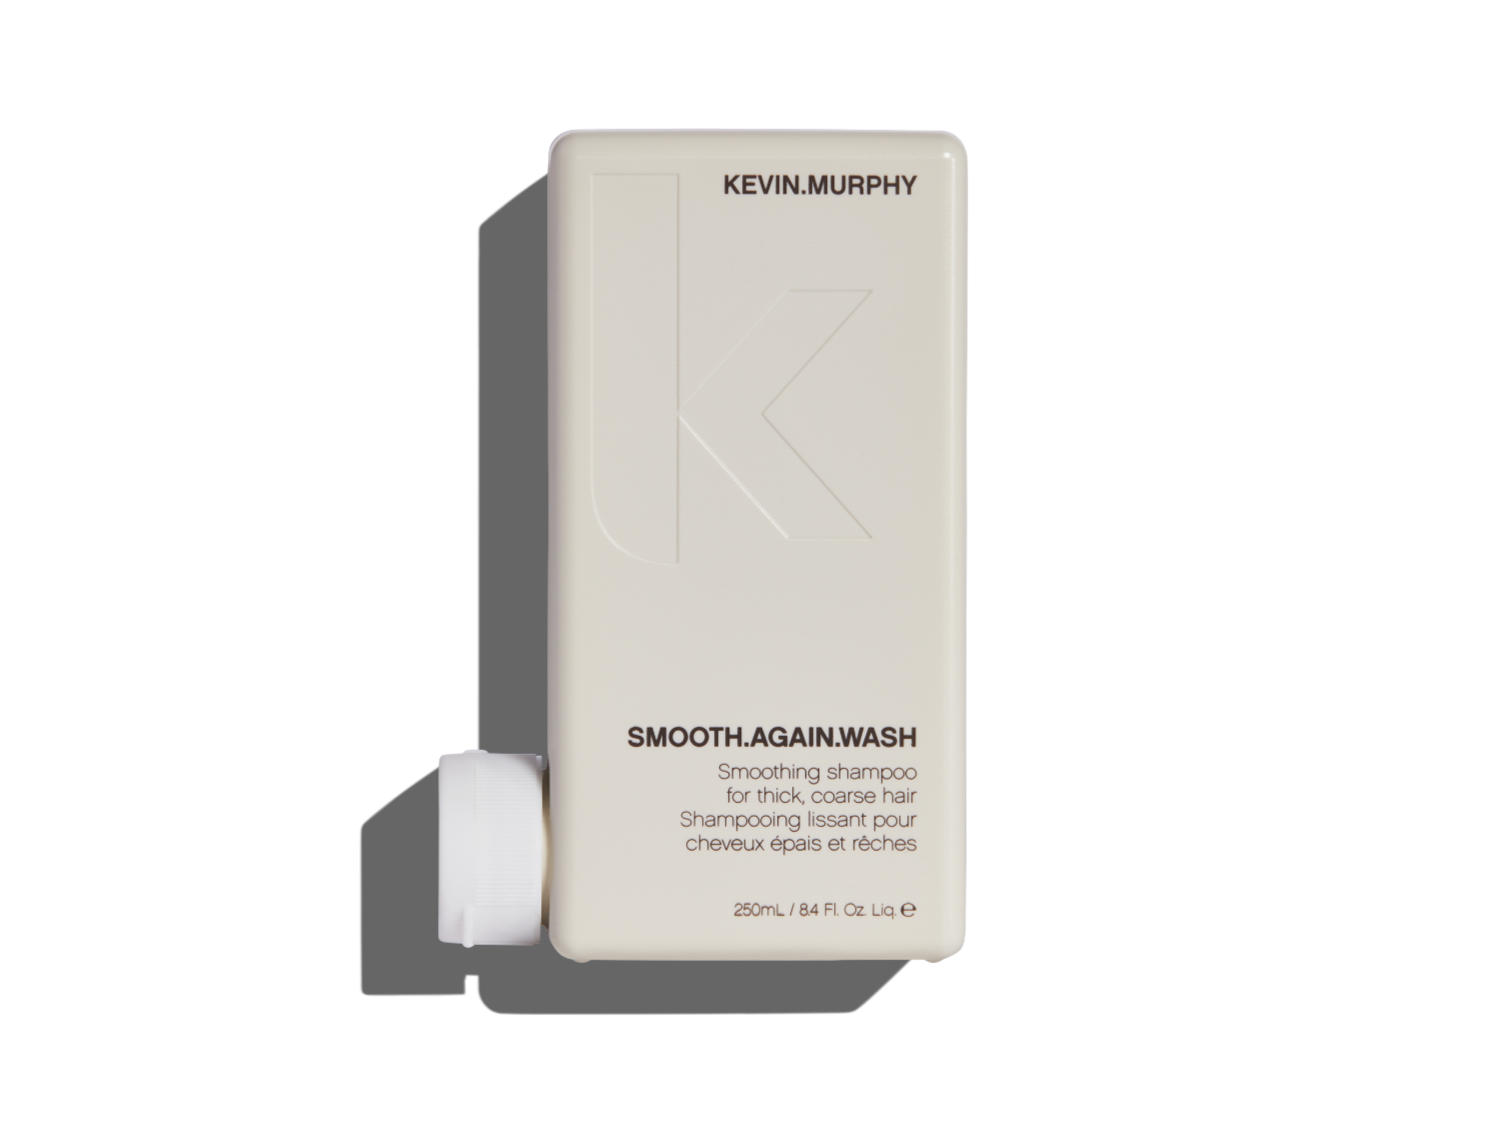 Arma Beauty - Kevin Murphy - SMOOTH.AGAIN.WASH